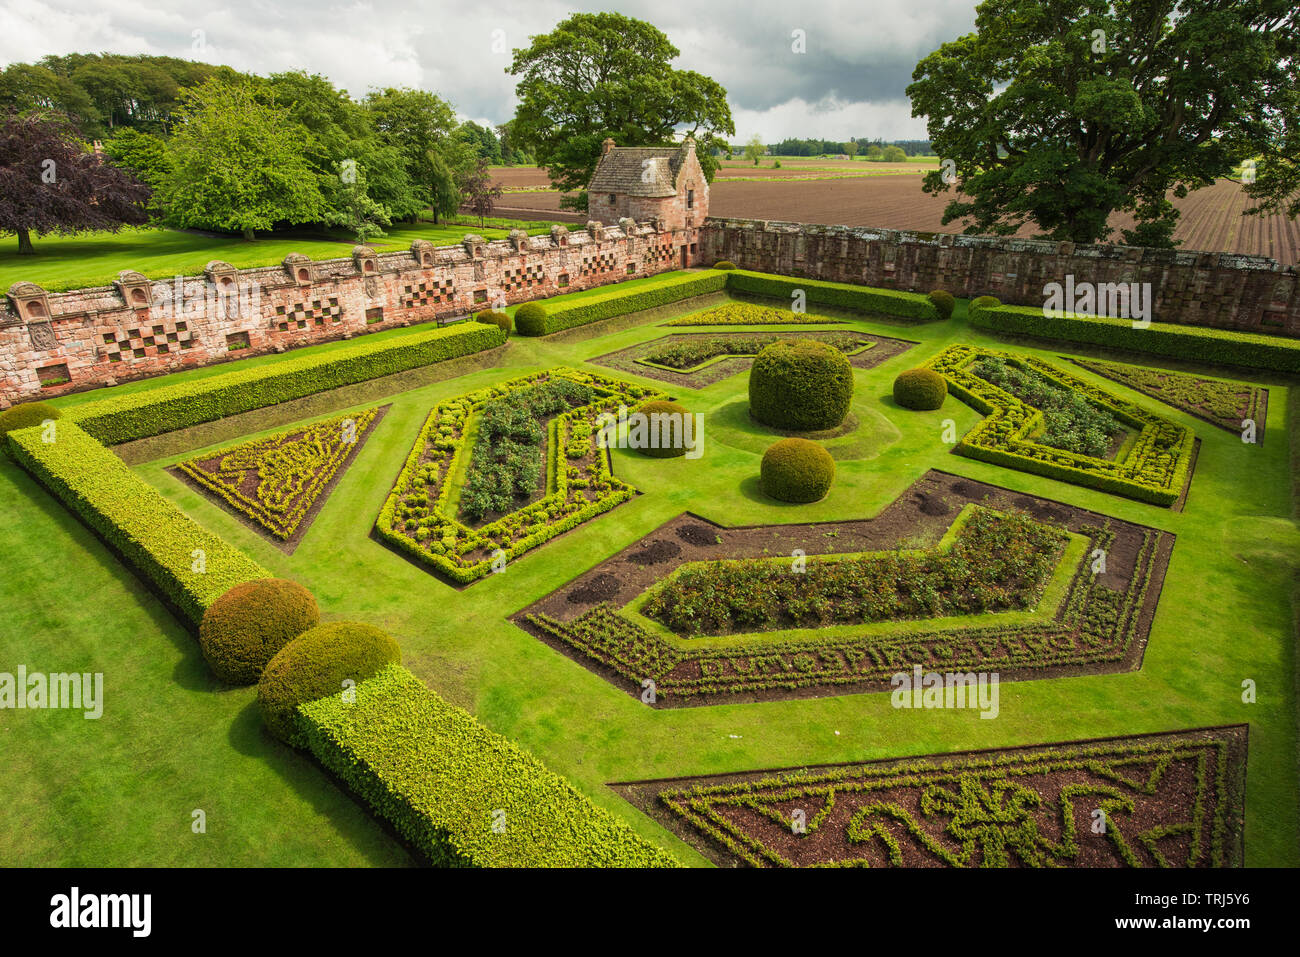 Edzell Castle, Angus, Scotland. The elaborate walled garden was created in 1604. Stock Photo